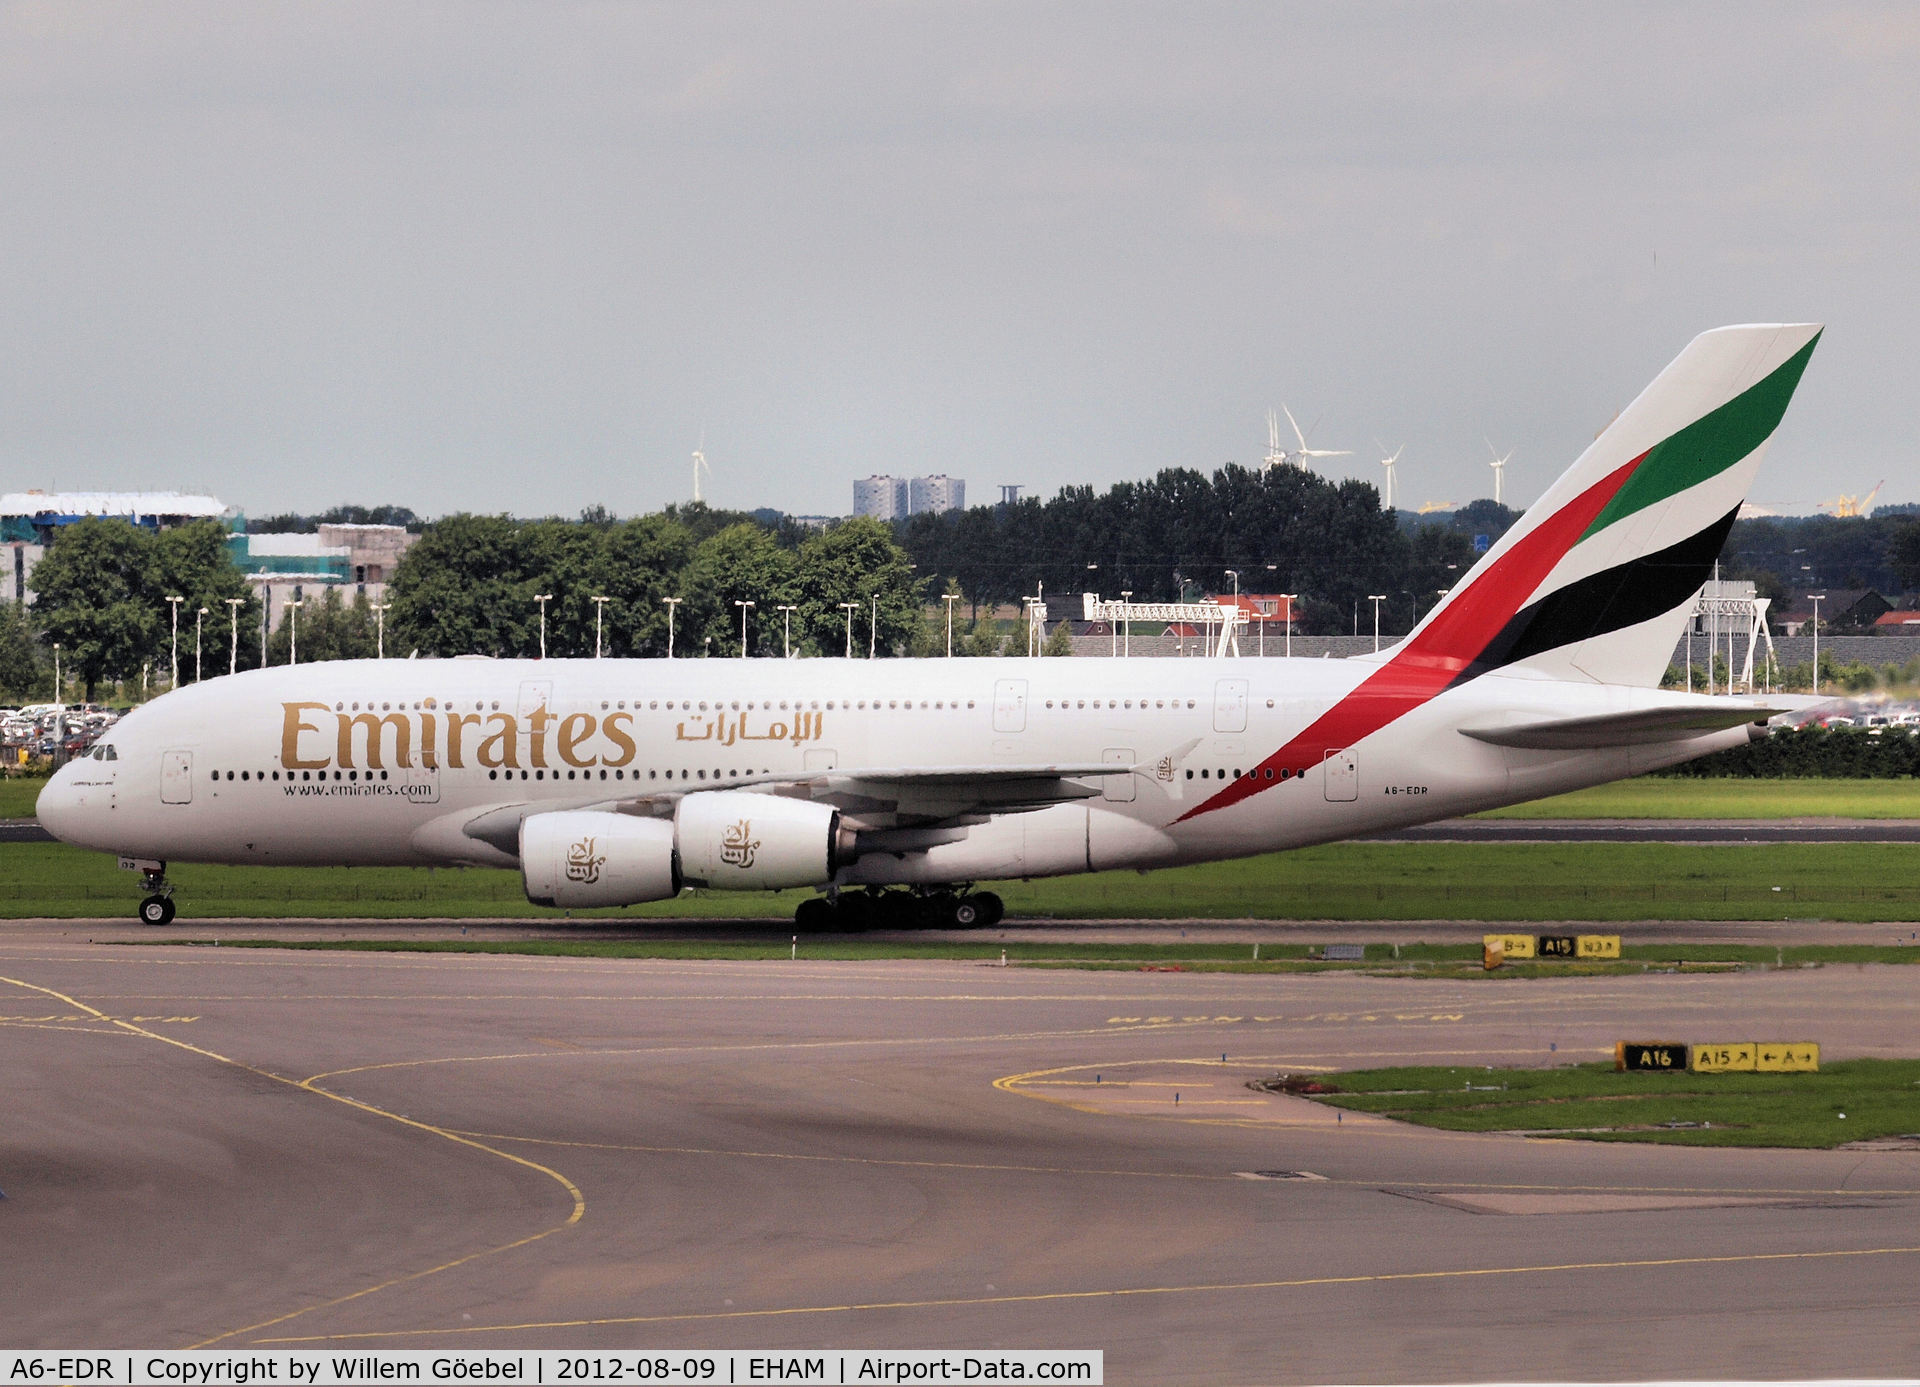 A6-EDR, 2011 Airbus A380-861 C/N 083, Taxi to the gate of Schiphol Airport